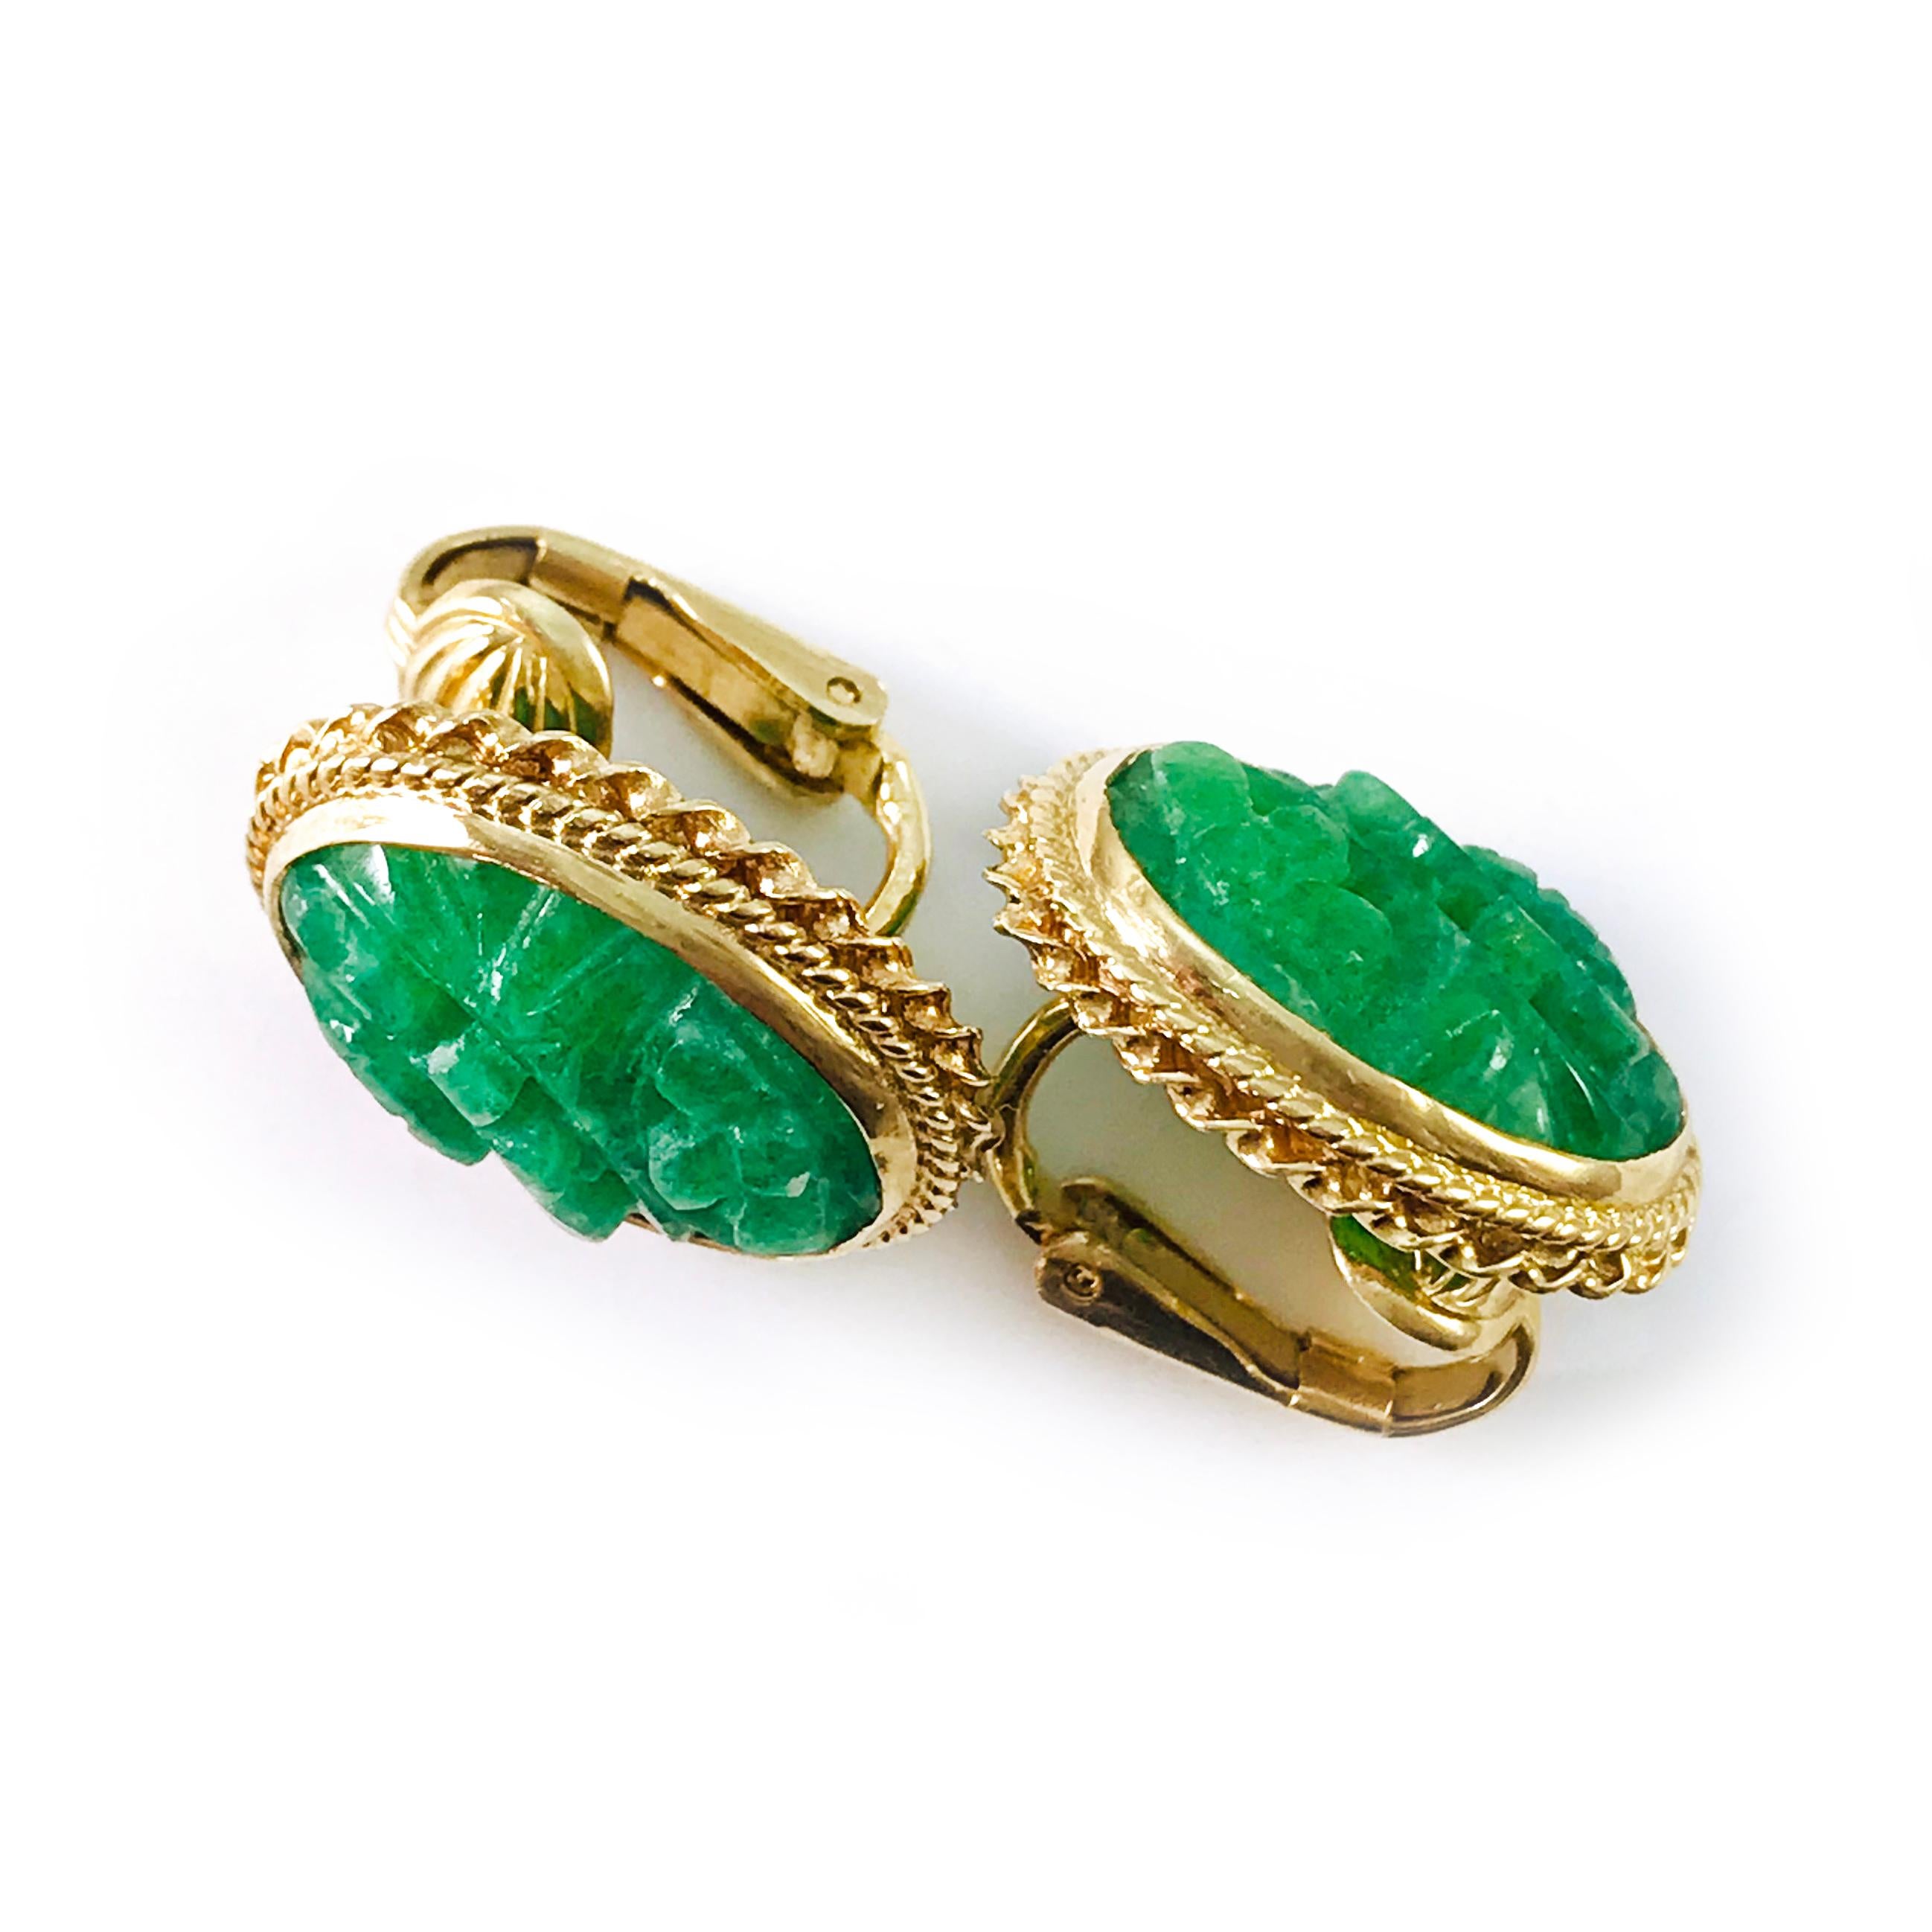 14 Karat Carved Green Jade Clip-On Earrings. Vibrant green carved Jade oval earrings with twisted gold rope detail wrapped around rope bezel, clip-on back. The weight of the earrings is 7.78 grams.